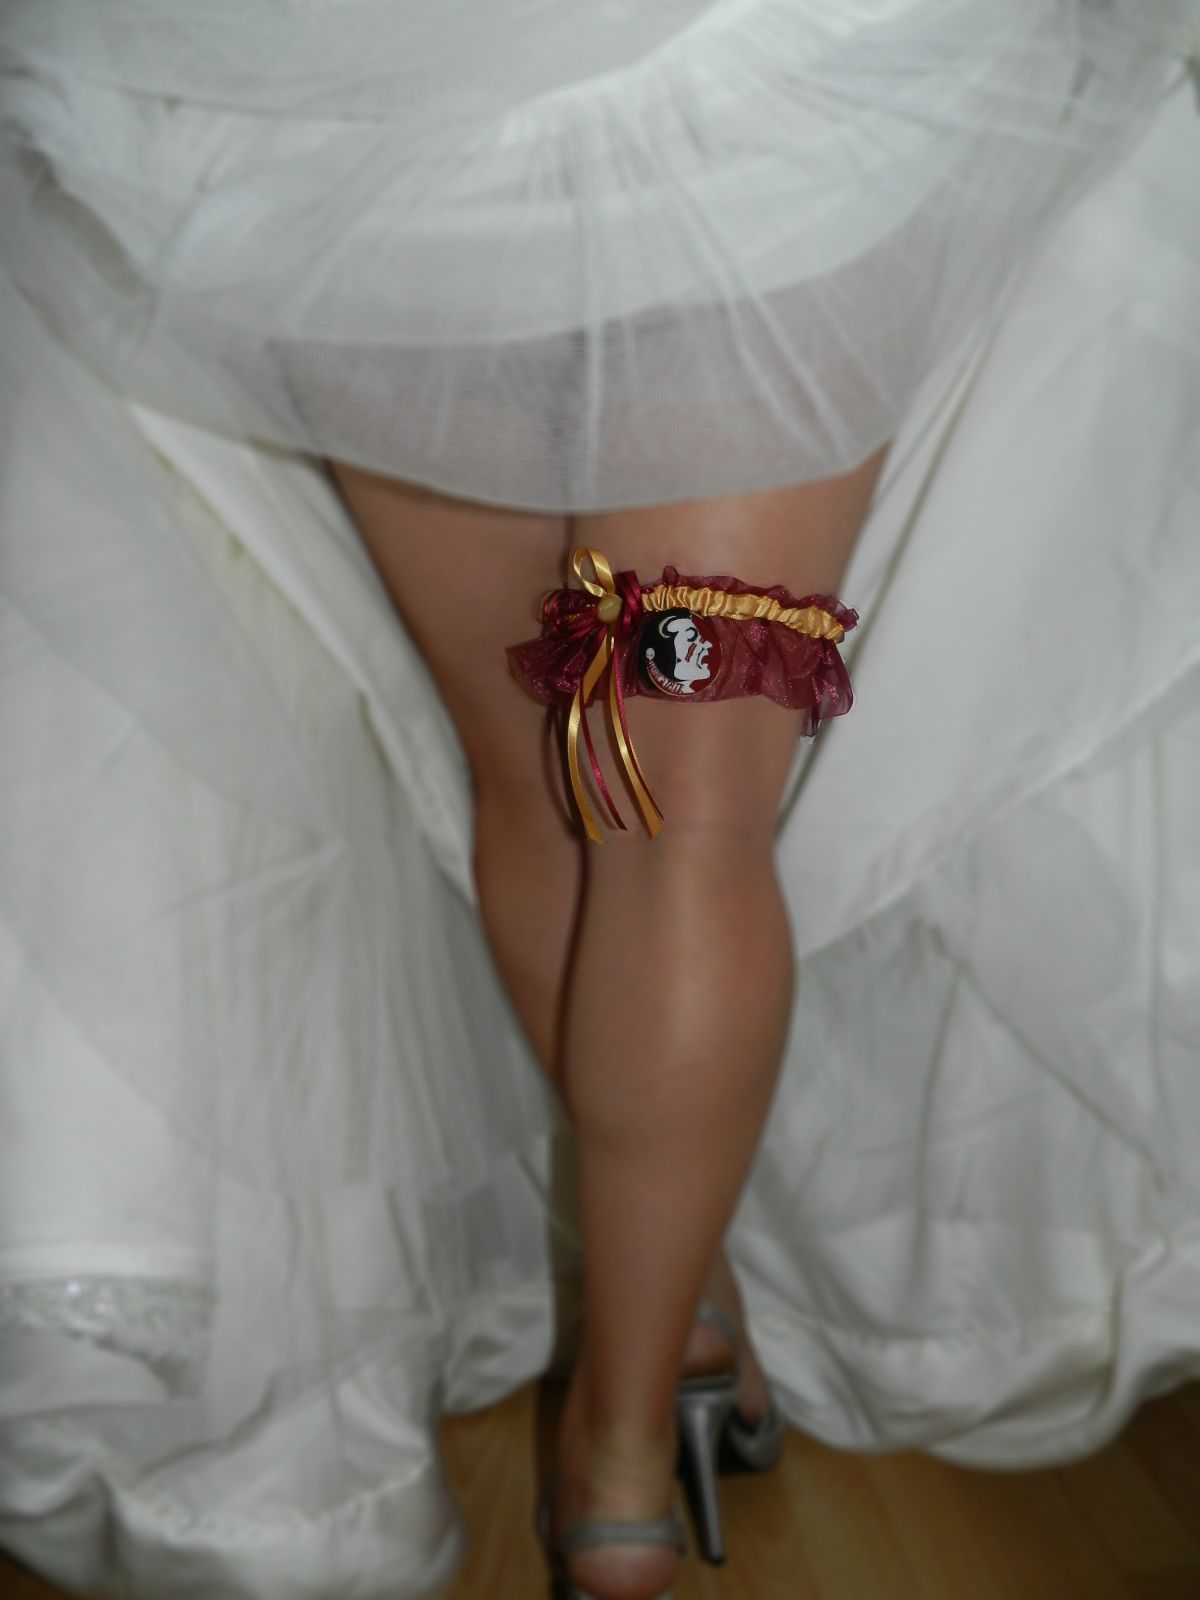 Show me your garters!